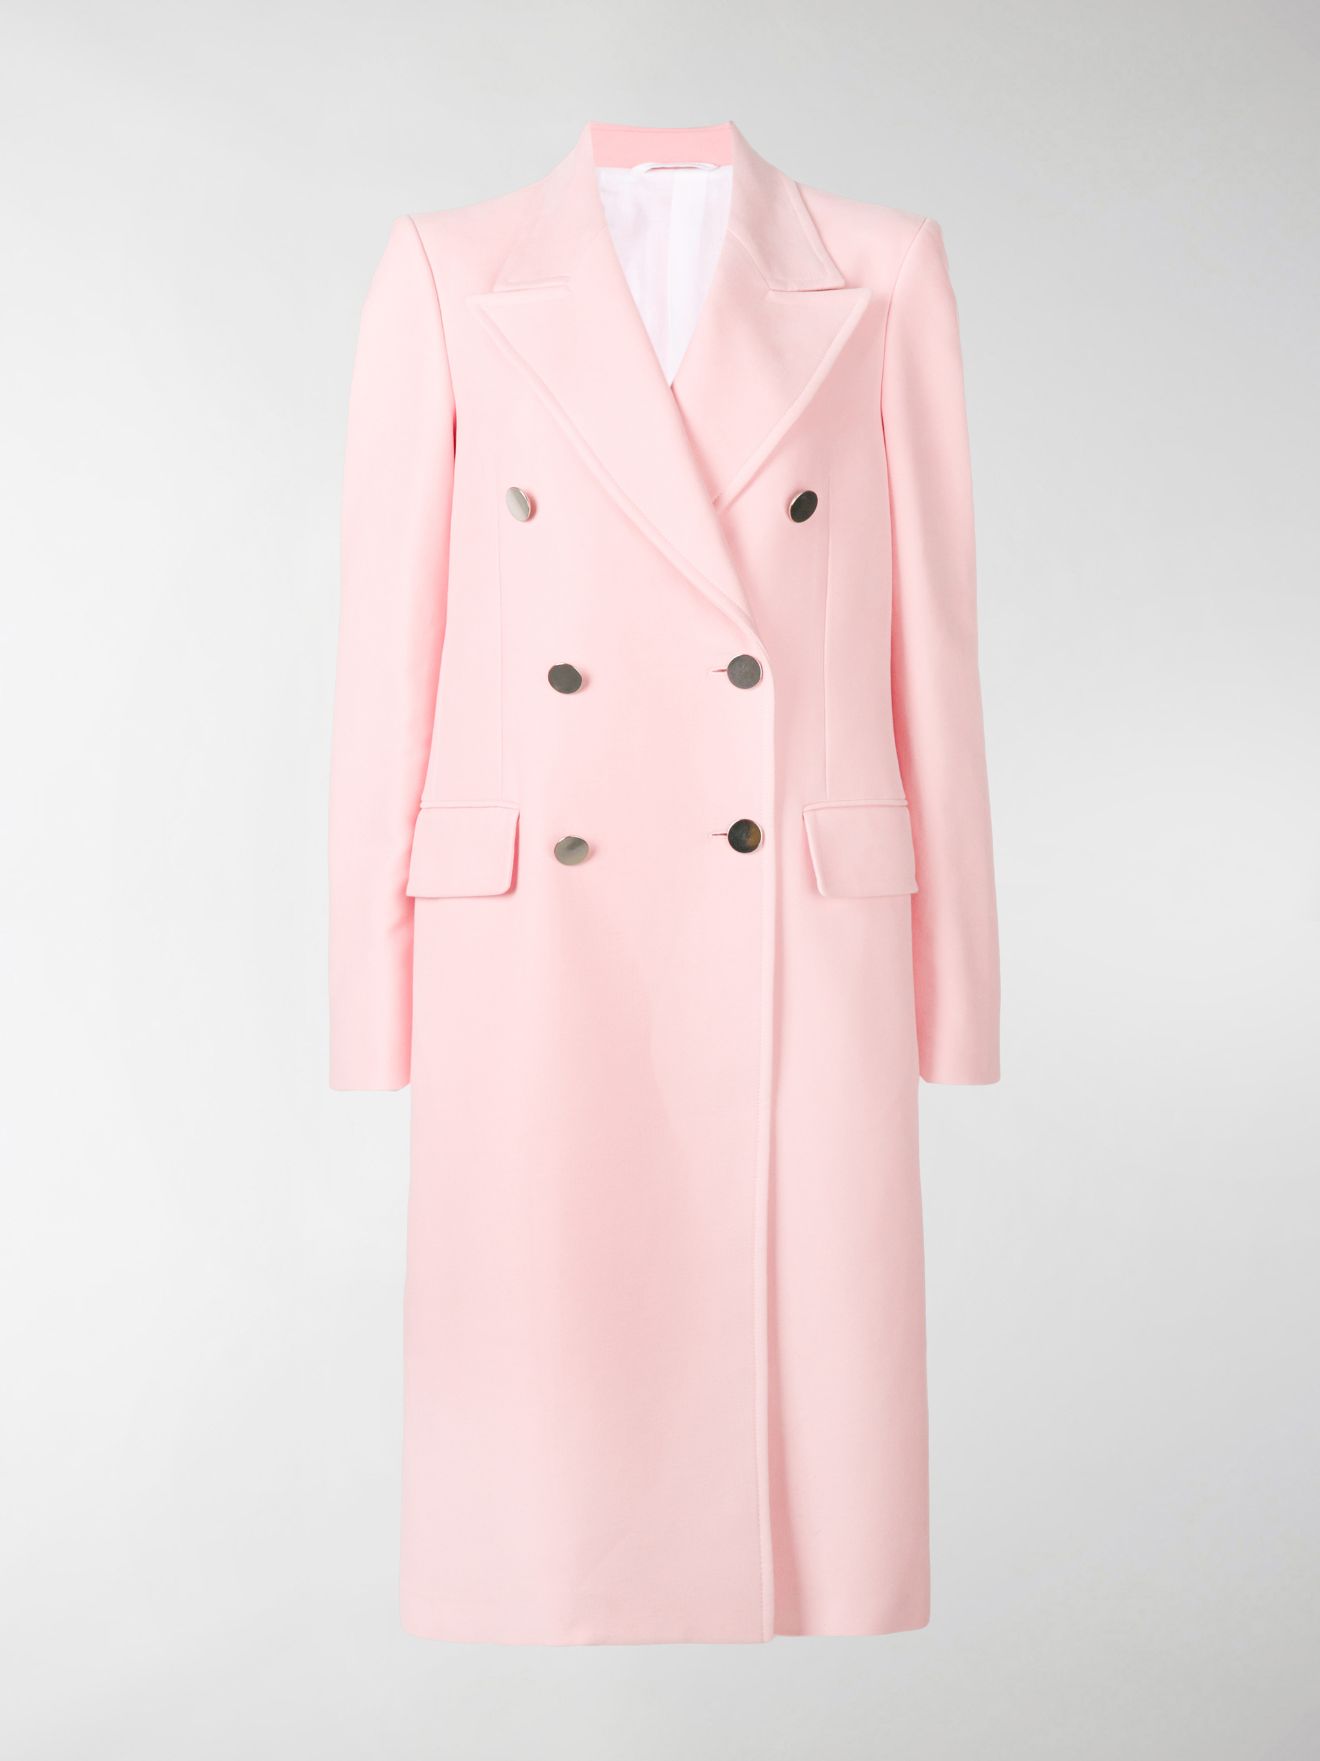 Calvin Klein double-breasted fitted coat pink | MODES